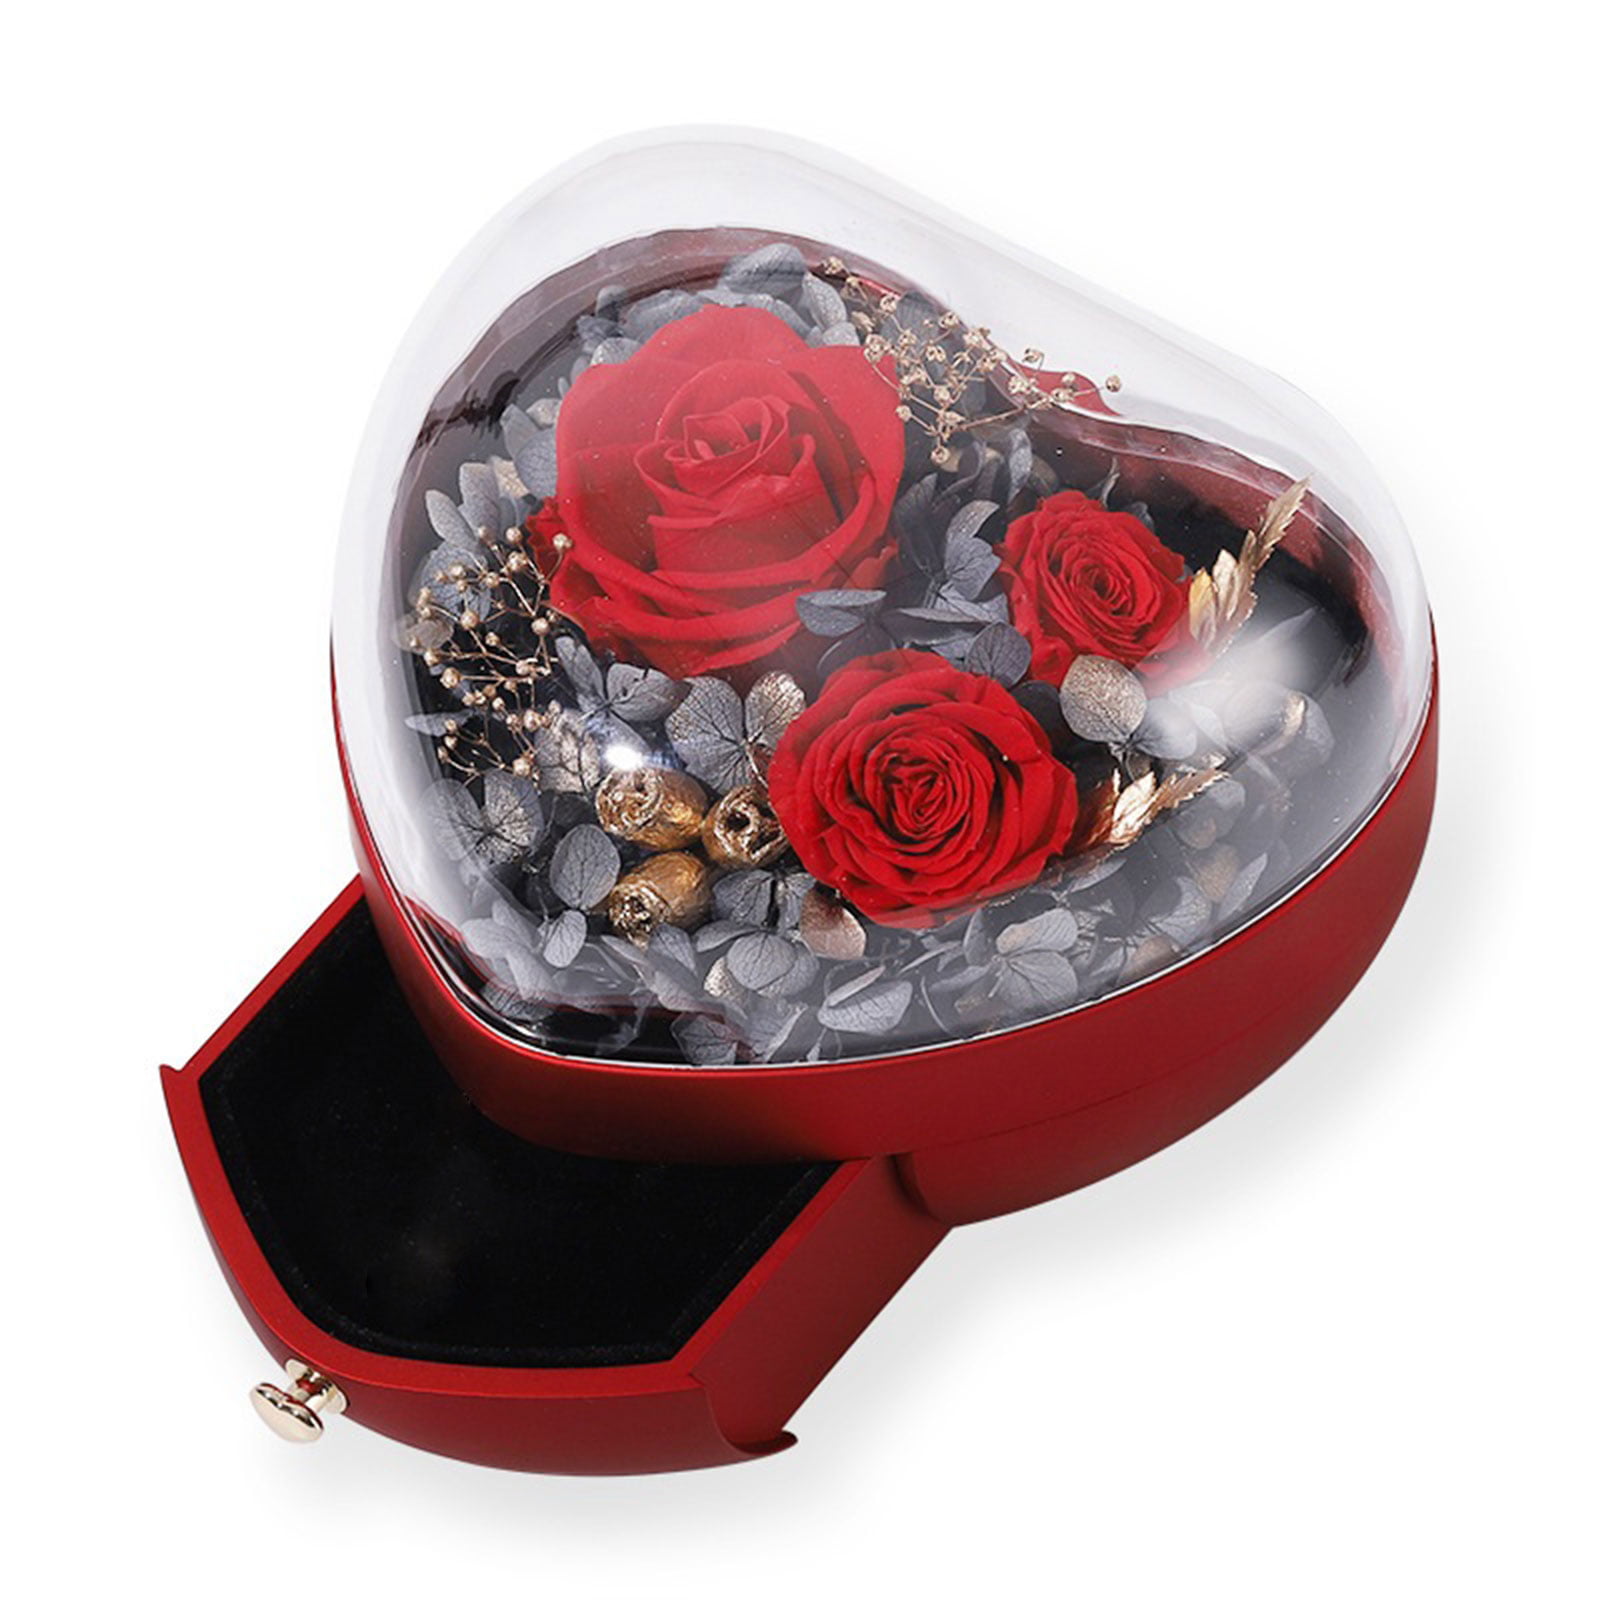 Handmade Preserved Fresh Flower Immortal Rose in Box Valentine's Day Lady Gifts 